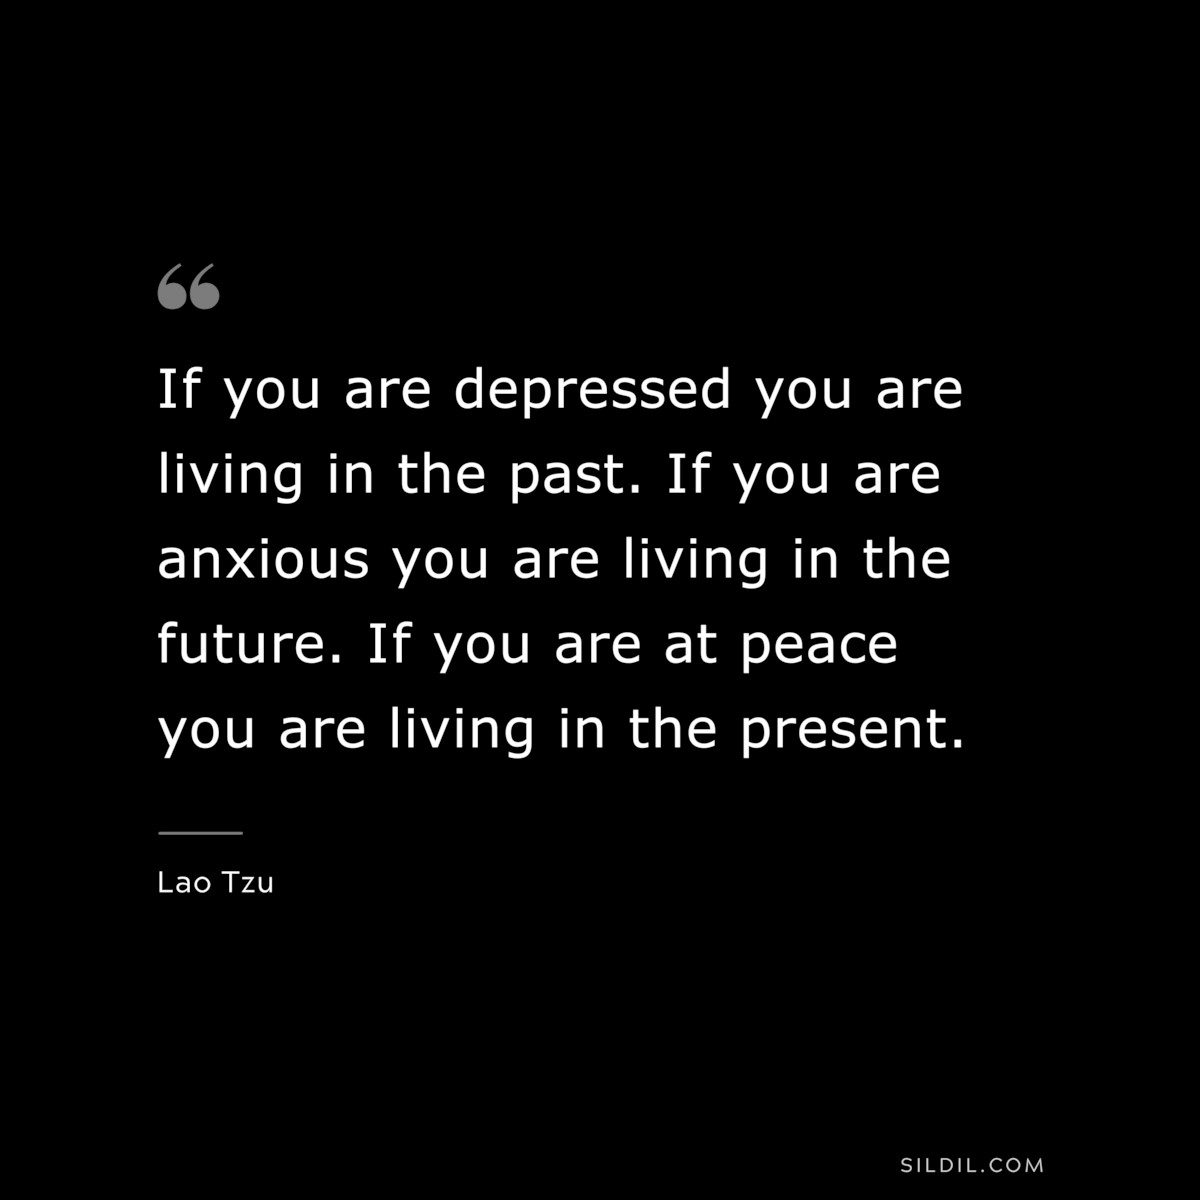 If you are depressed you are living in the past. If you are anxious you are living in the future. If you are at peace you are living in the present. ― Lao Tzu